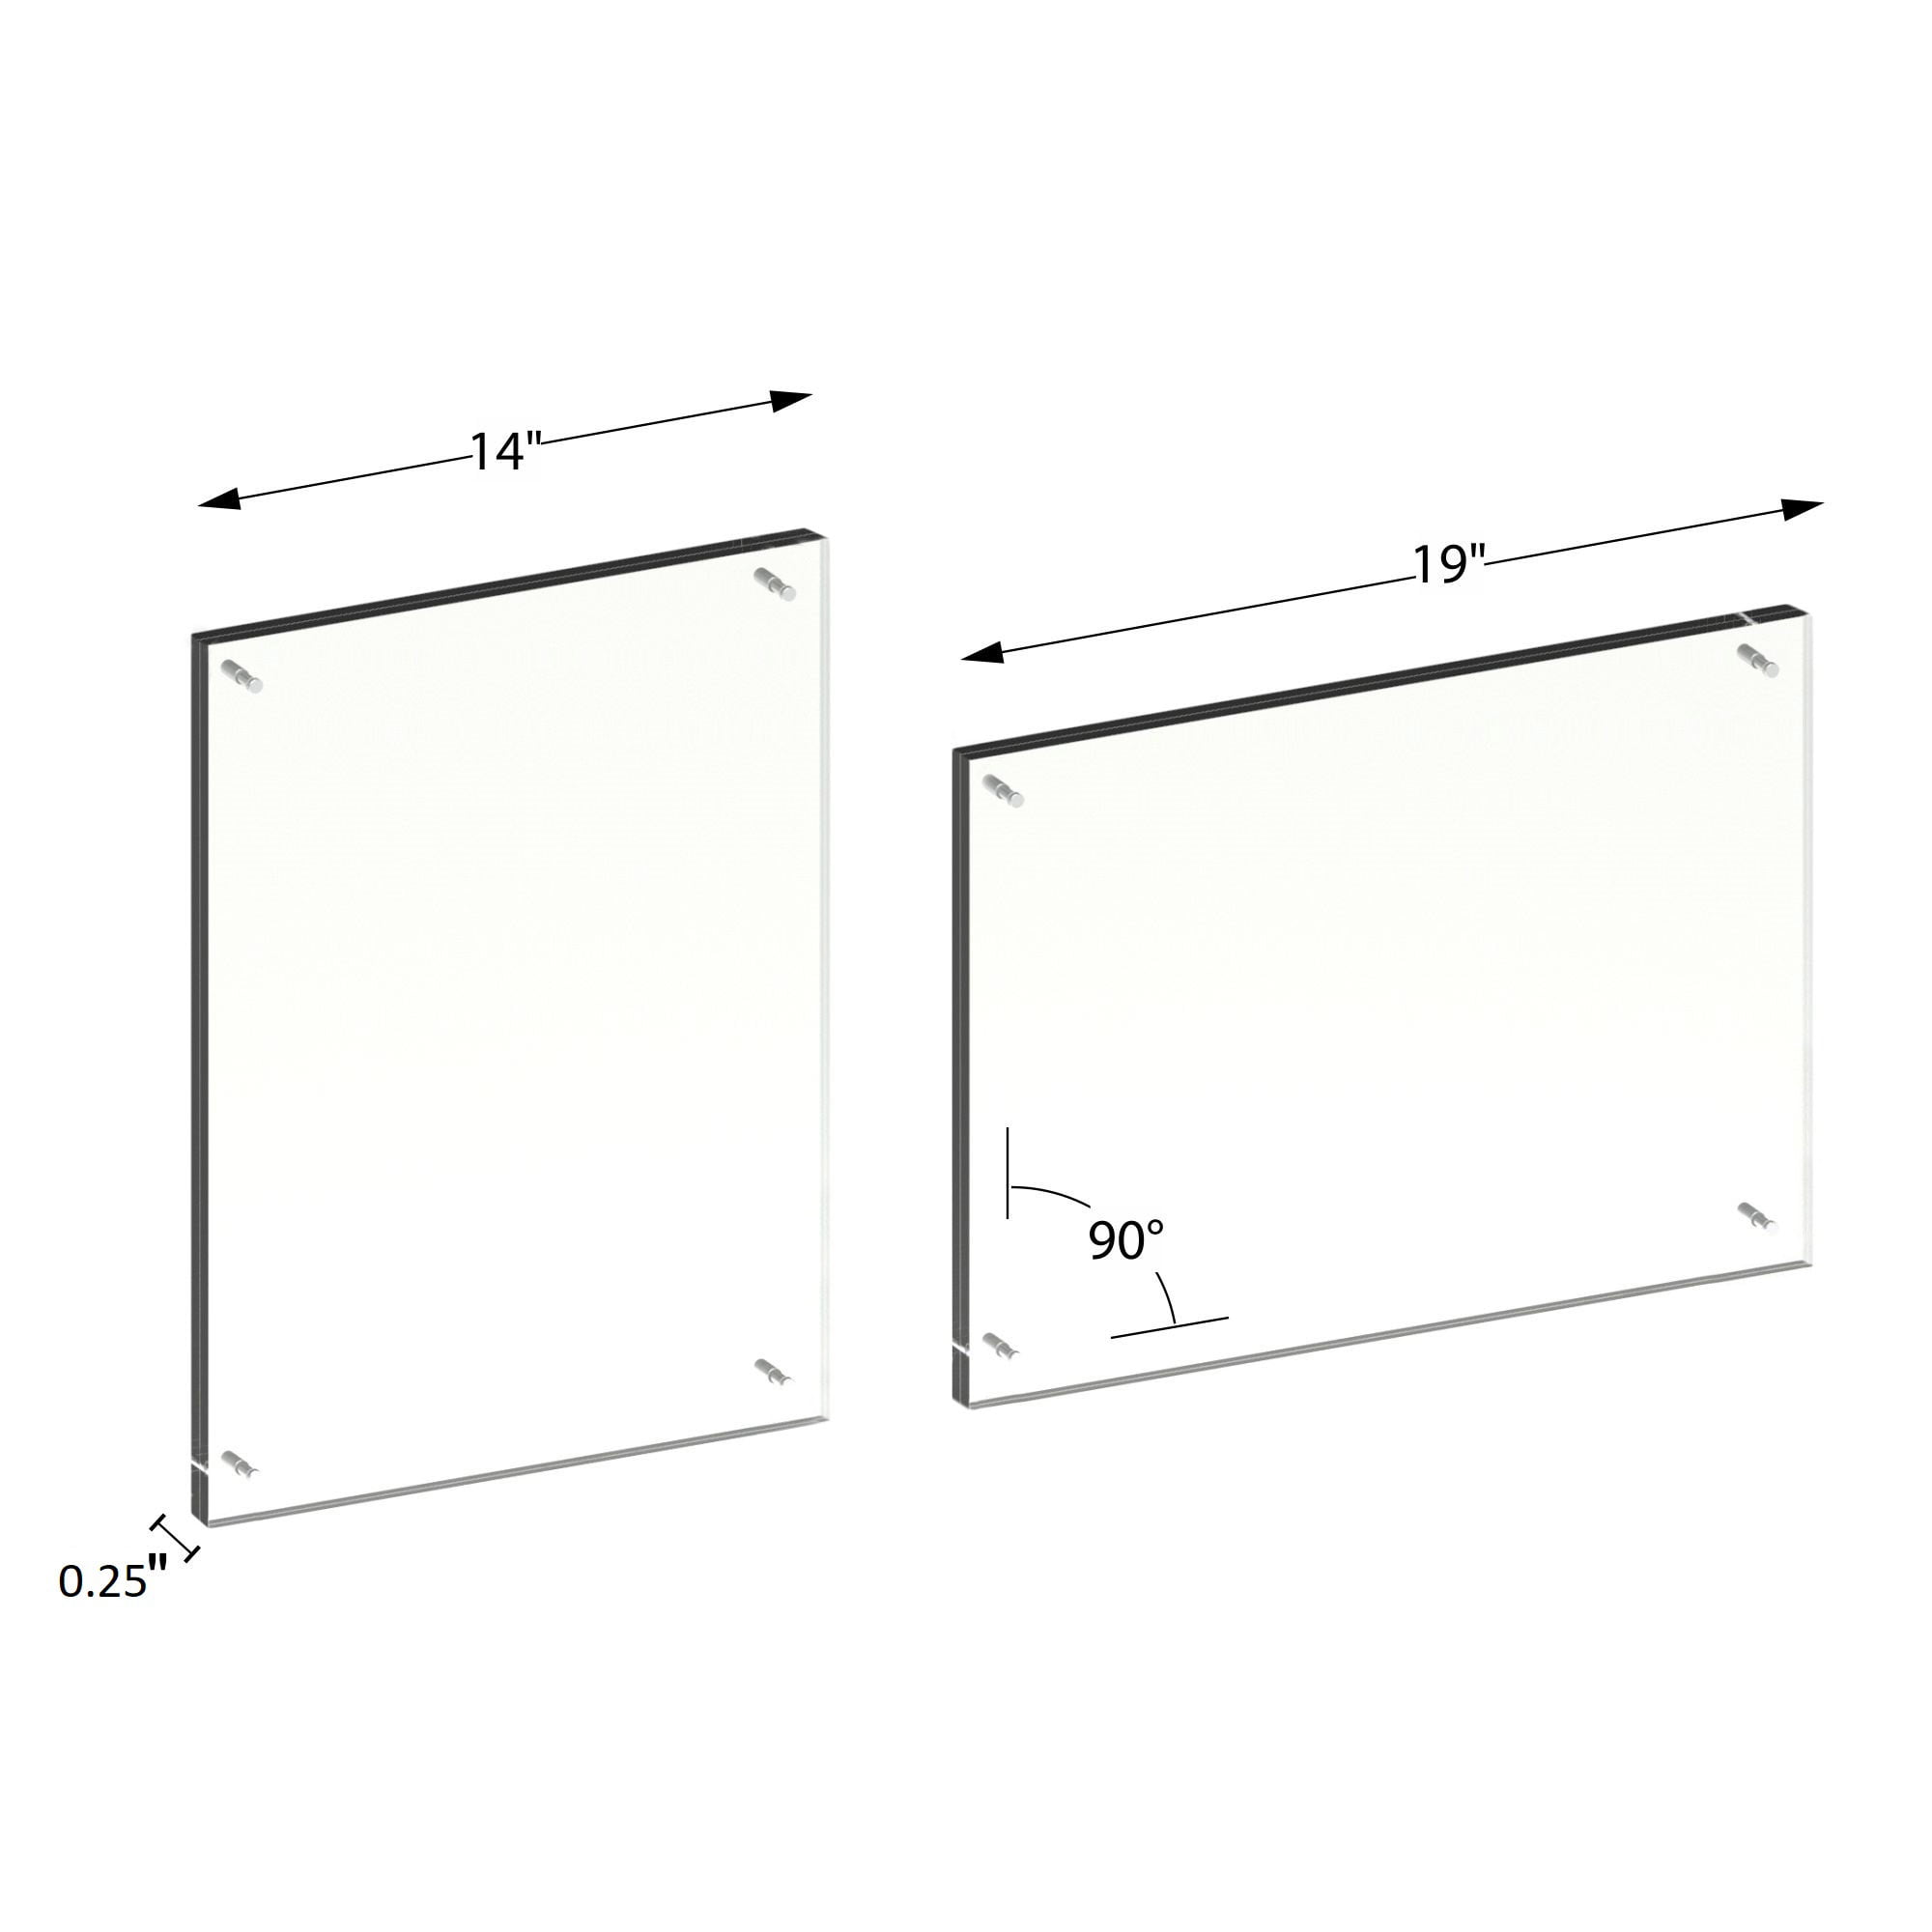 Acrylic Wall Mount Floating Frameless Picture Frame Clear Portrait Holder  (Size 11 X 14)